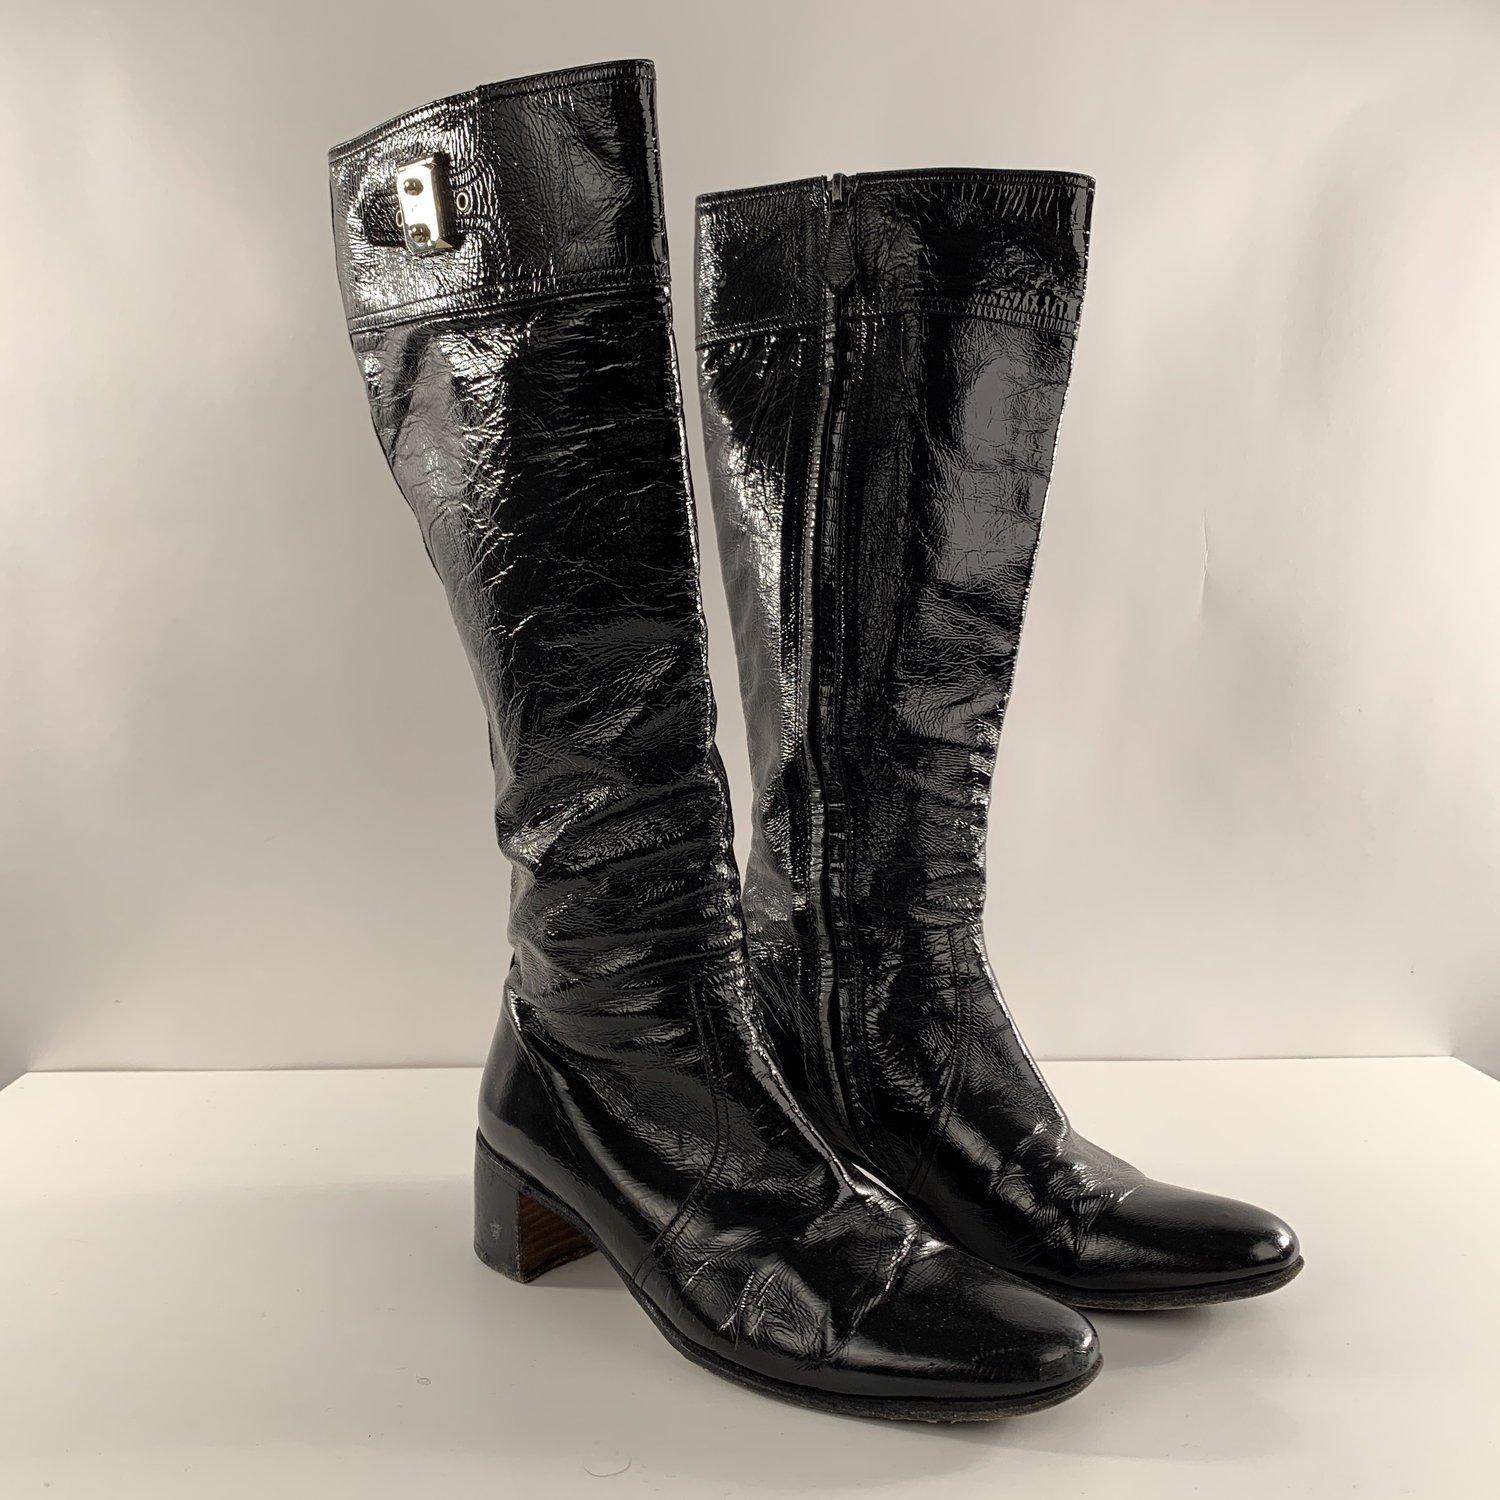 Beautiful heeled knees hight lenght boots by Hermes - Paris, in black patent leather. Silver metal hardware with lock detailing on the side Internal zip closure. Block heels (2 inches - 5,1 cm high). Size: 36. Made in Italy

Details

MATERIAL: